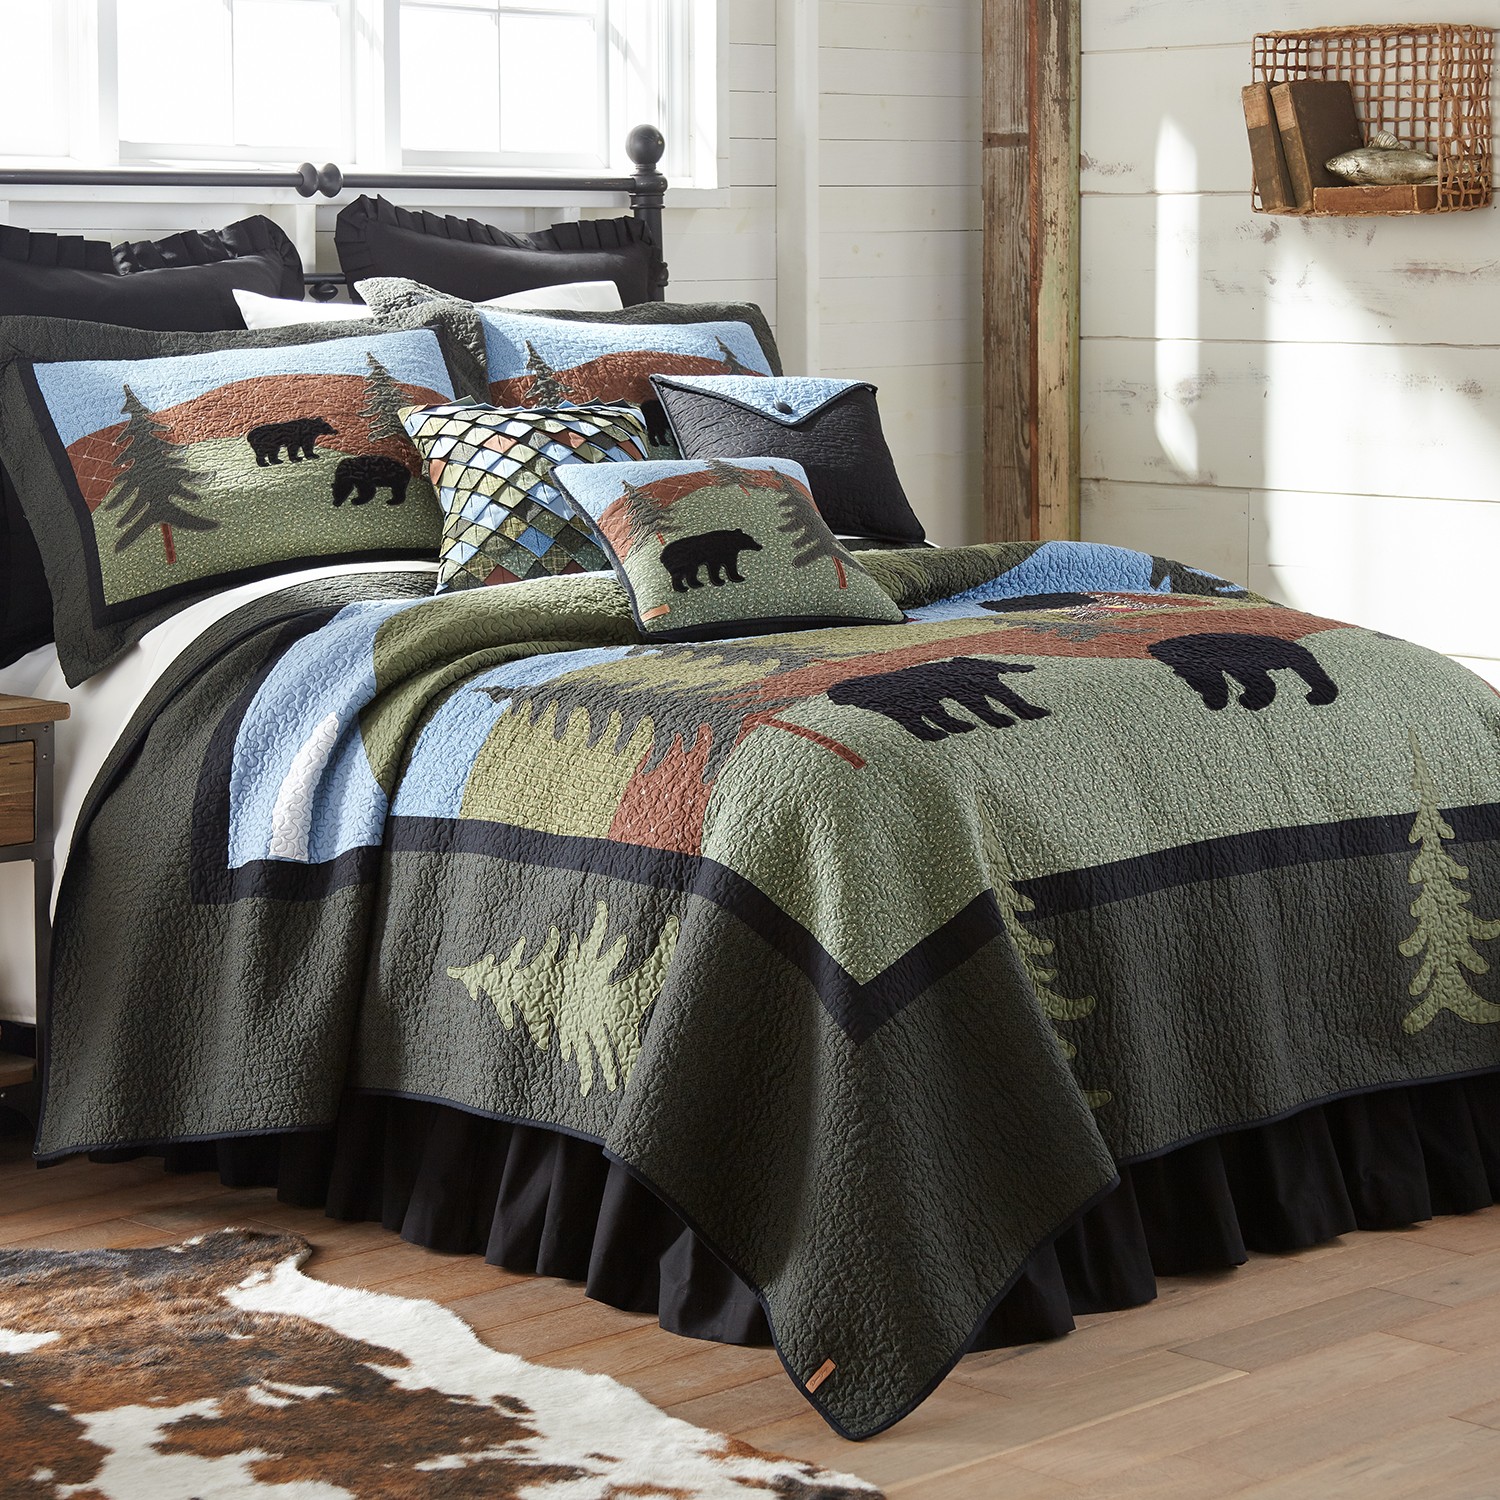 Bear Lake Cotton King Quilt by Donna Sharp - Lodge Quilt with Bear Pattern - King - Machine Washable - image 1 of 3